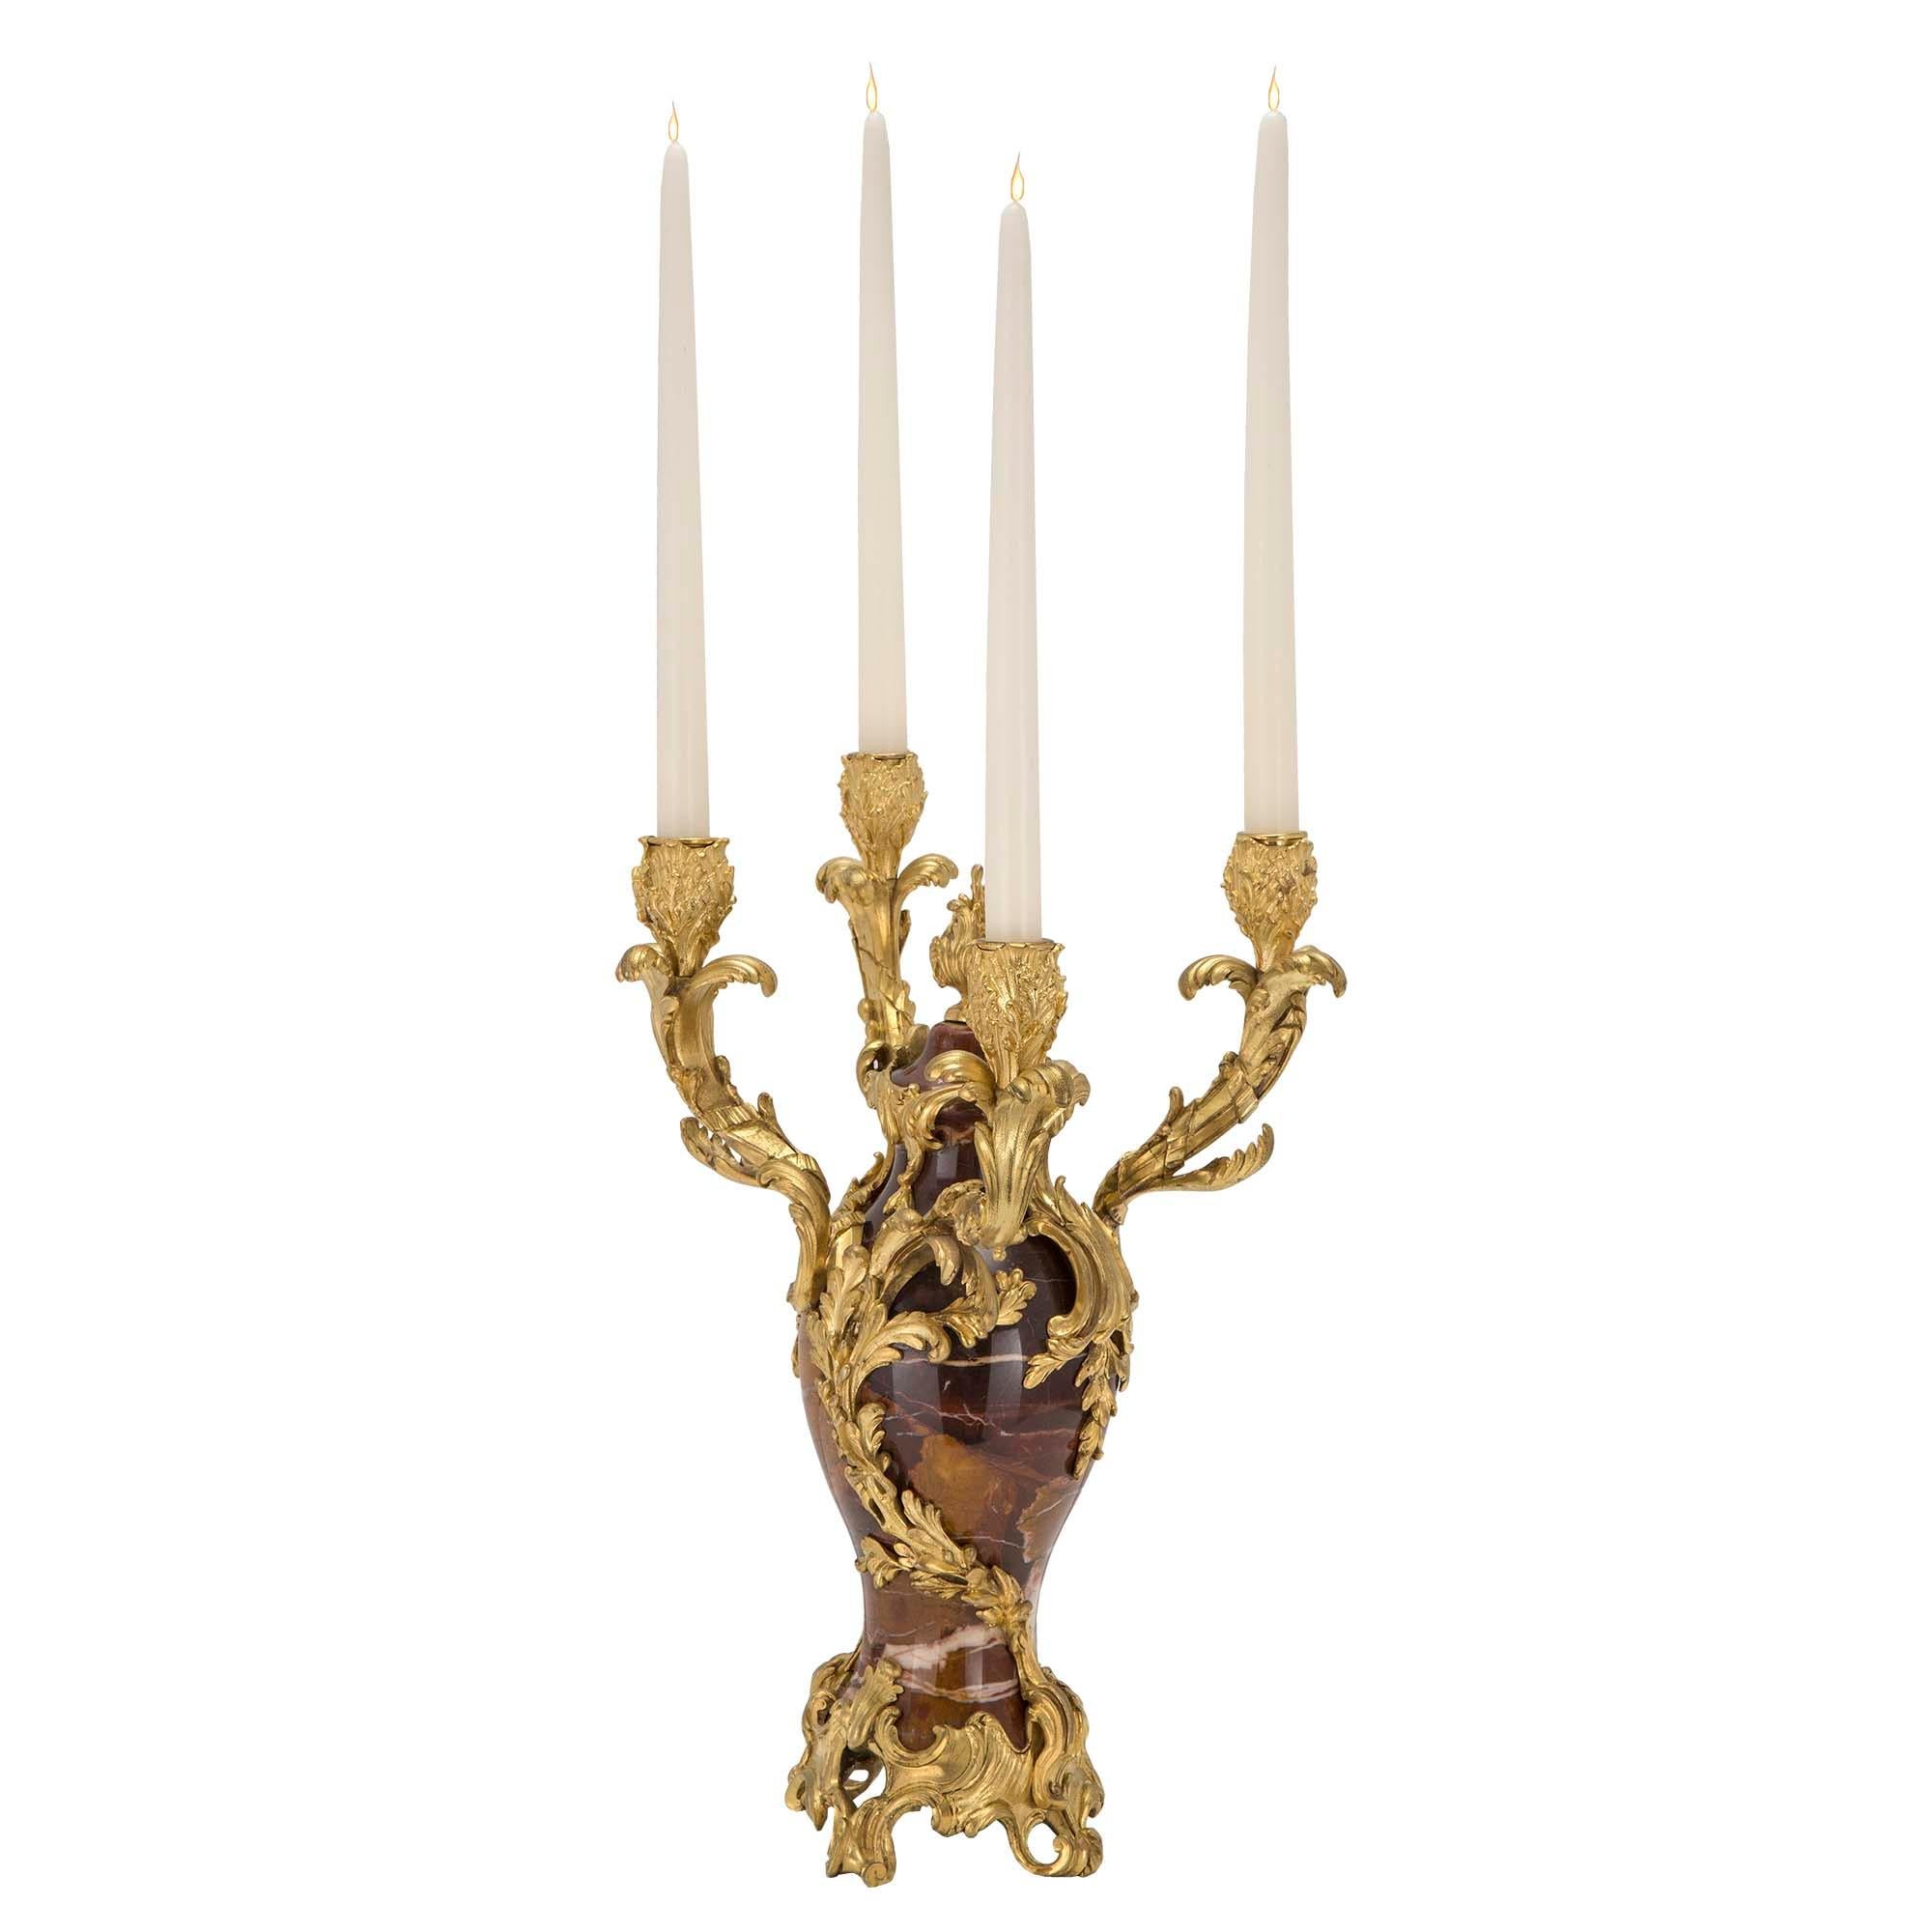 A magnificent pair of French 19th century Louis XV st. finely chased ormolu and marble candelabras, signed F. Linke. Each four arm candelabra is raised on a pierced scrolled ormolu base, with very impressive ormolu foliate wrapping up the marble